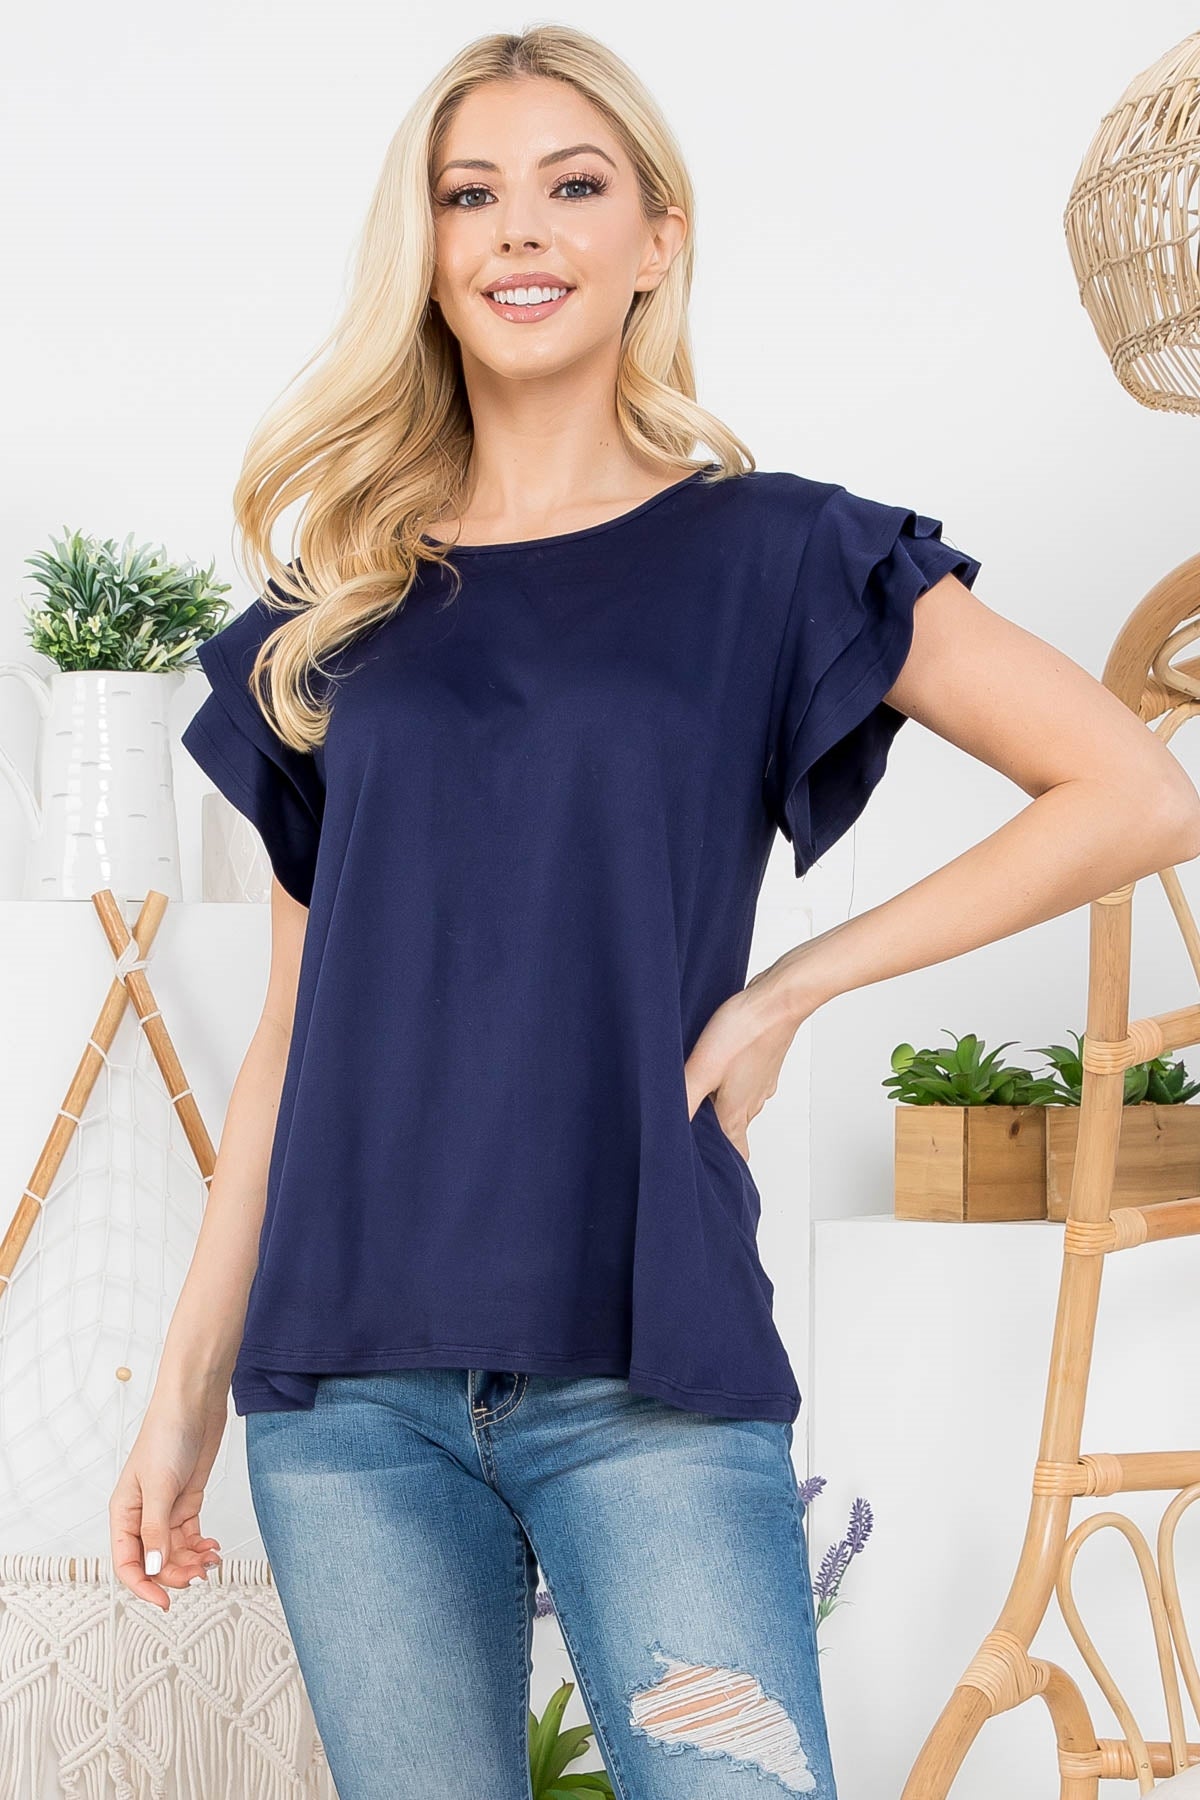 BOAT NECK RUFFLE CAP SLEEVE SOLID TOP 1-2-2-2